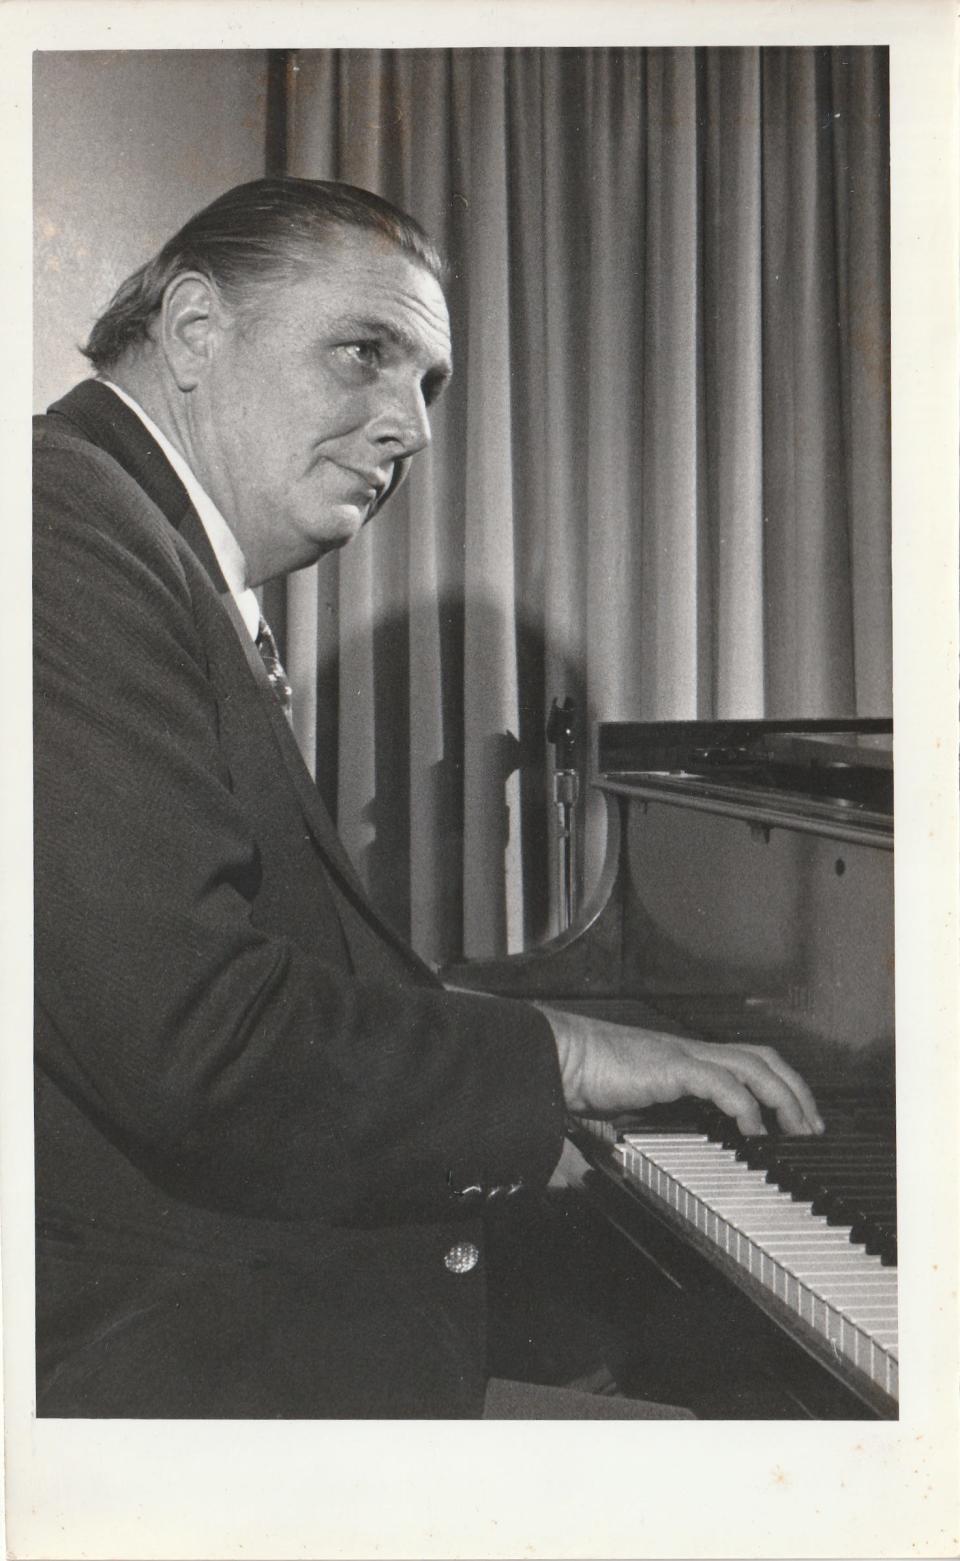 An image of jazz pianist Dave McKenna from the "Key Man" documentary that Woods Hole Film Festival is showing at Cotuit Center for the Arts.